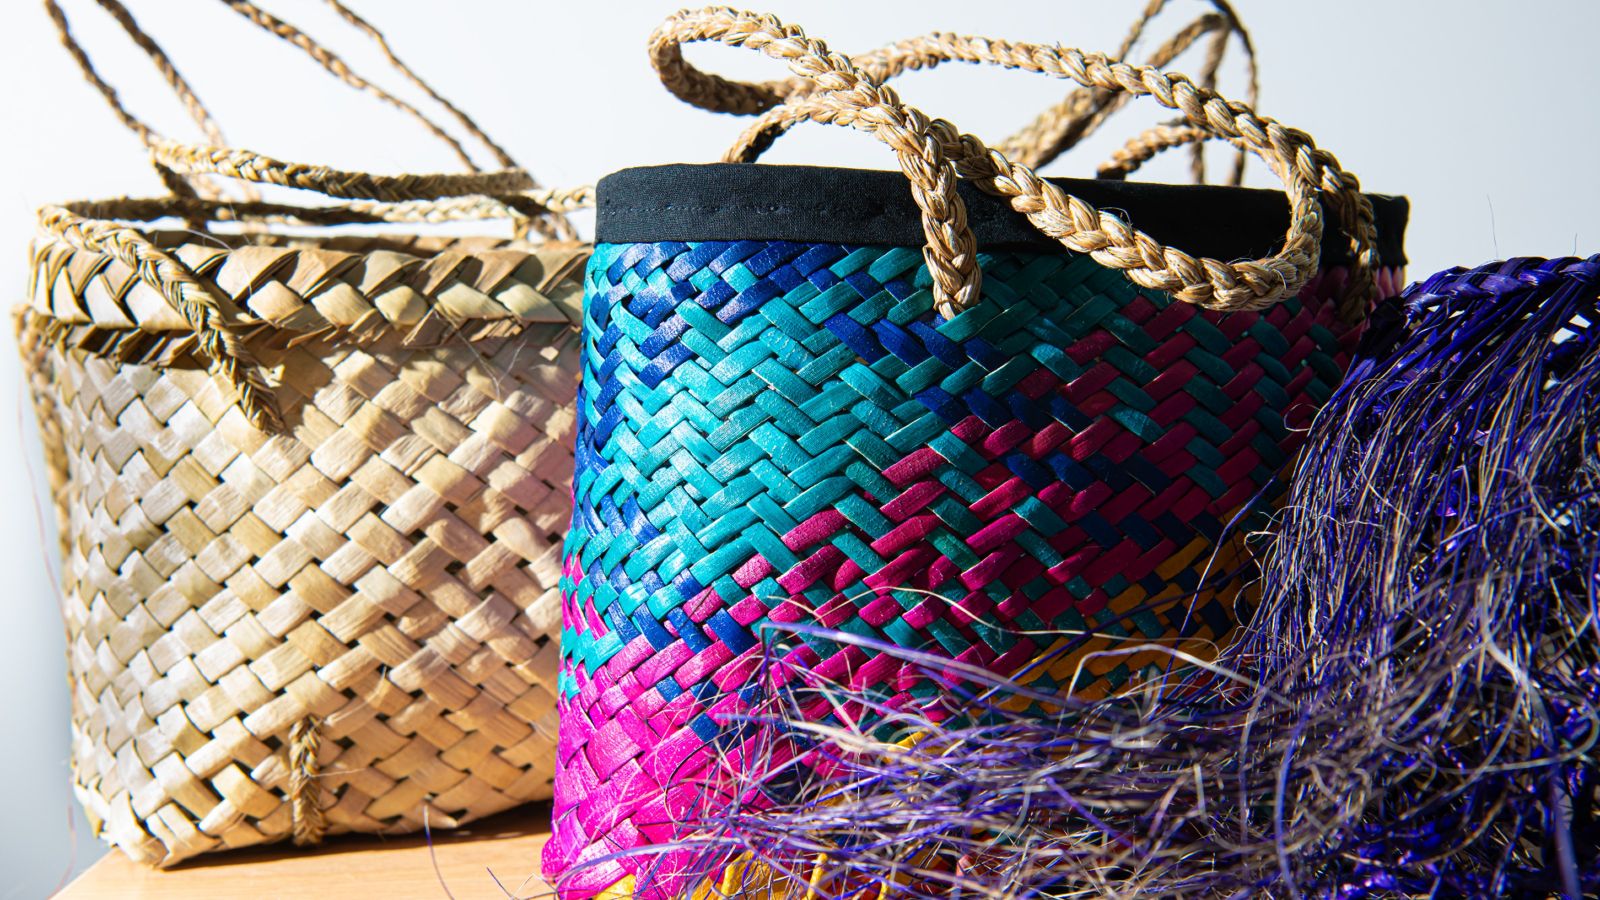 Two kete or woven baskets. One is purple, pink and blue and the other is traditional brown.